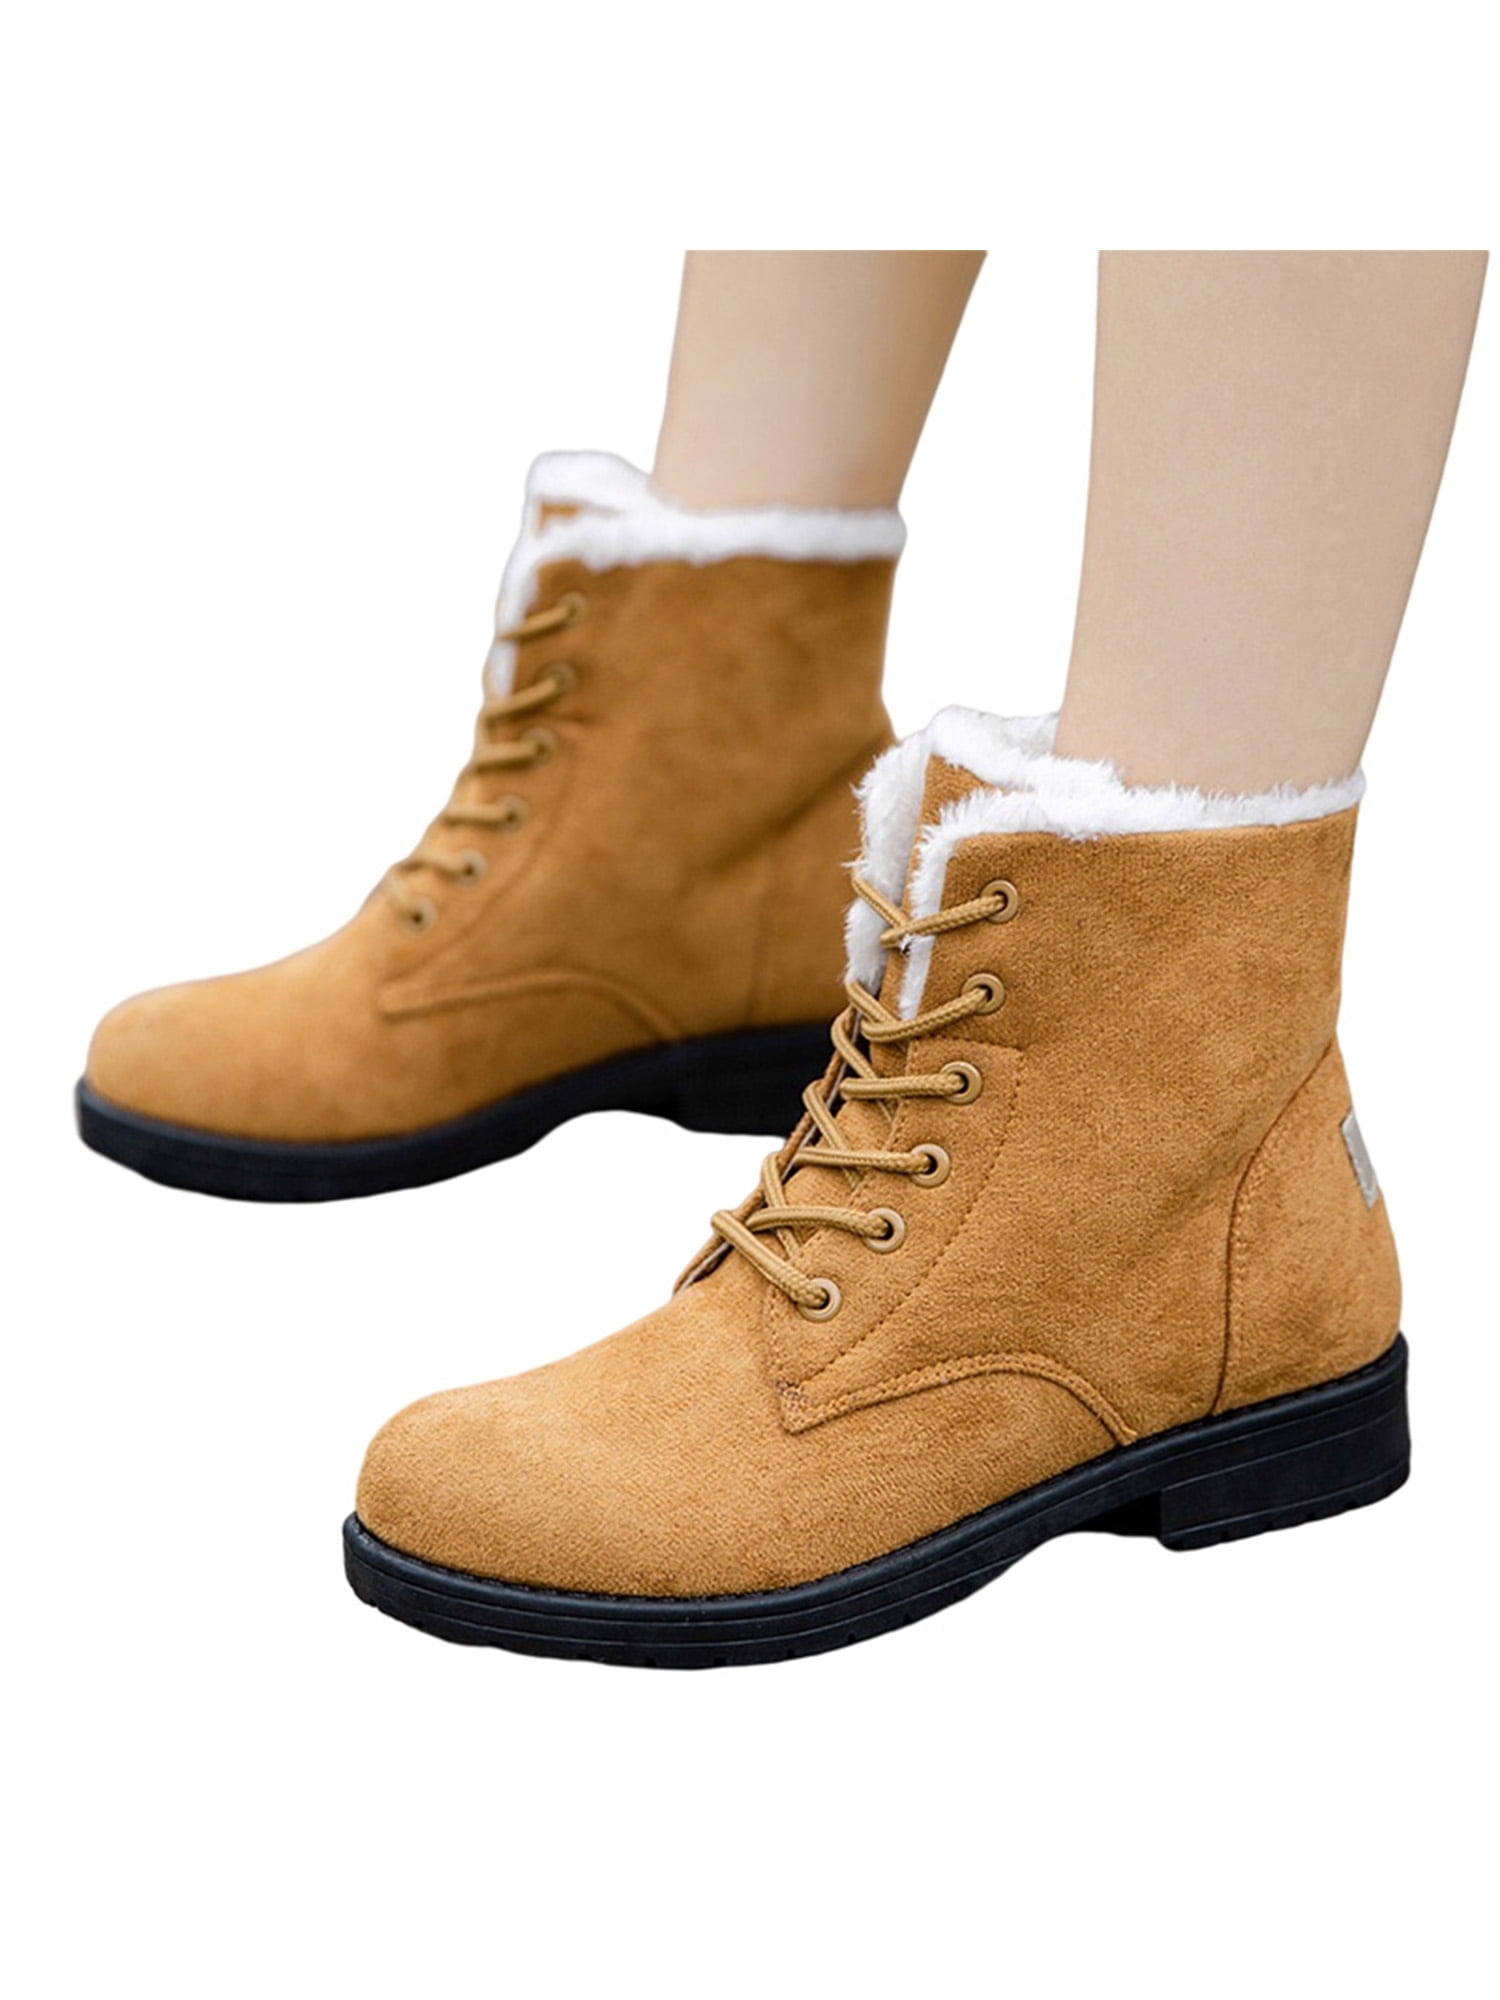 New Womens Ladies Winter Warm Fur Lined Flat Lace Up Snow Ankle Boots Shoes